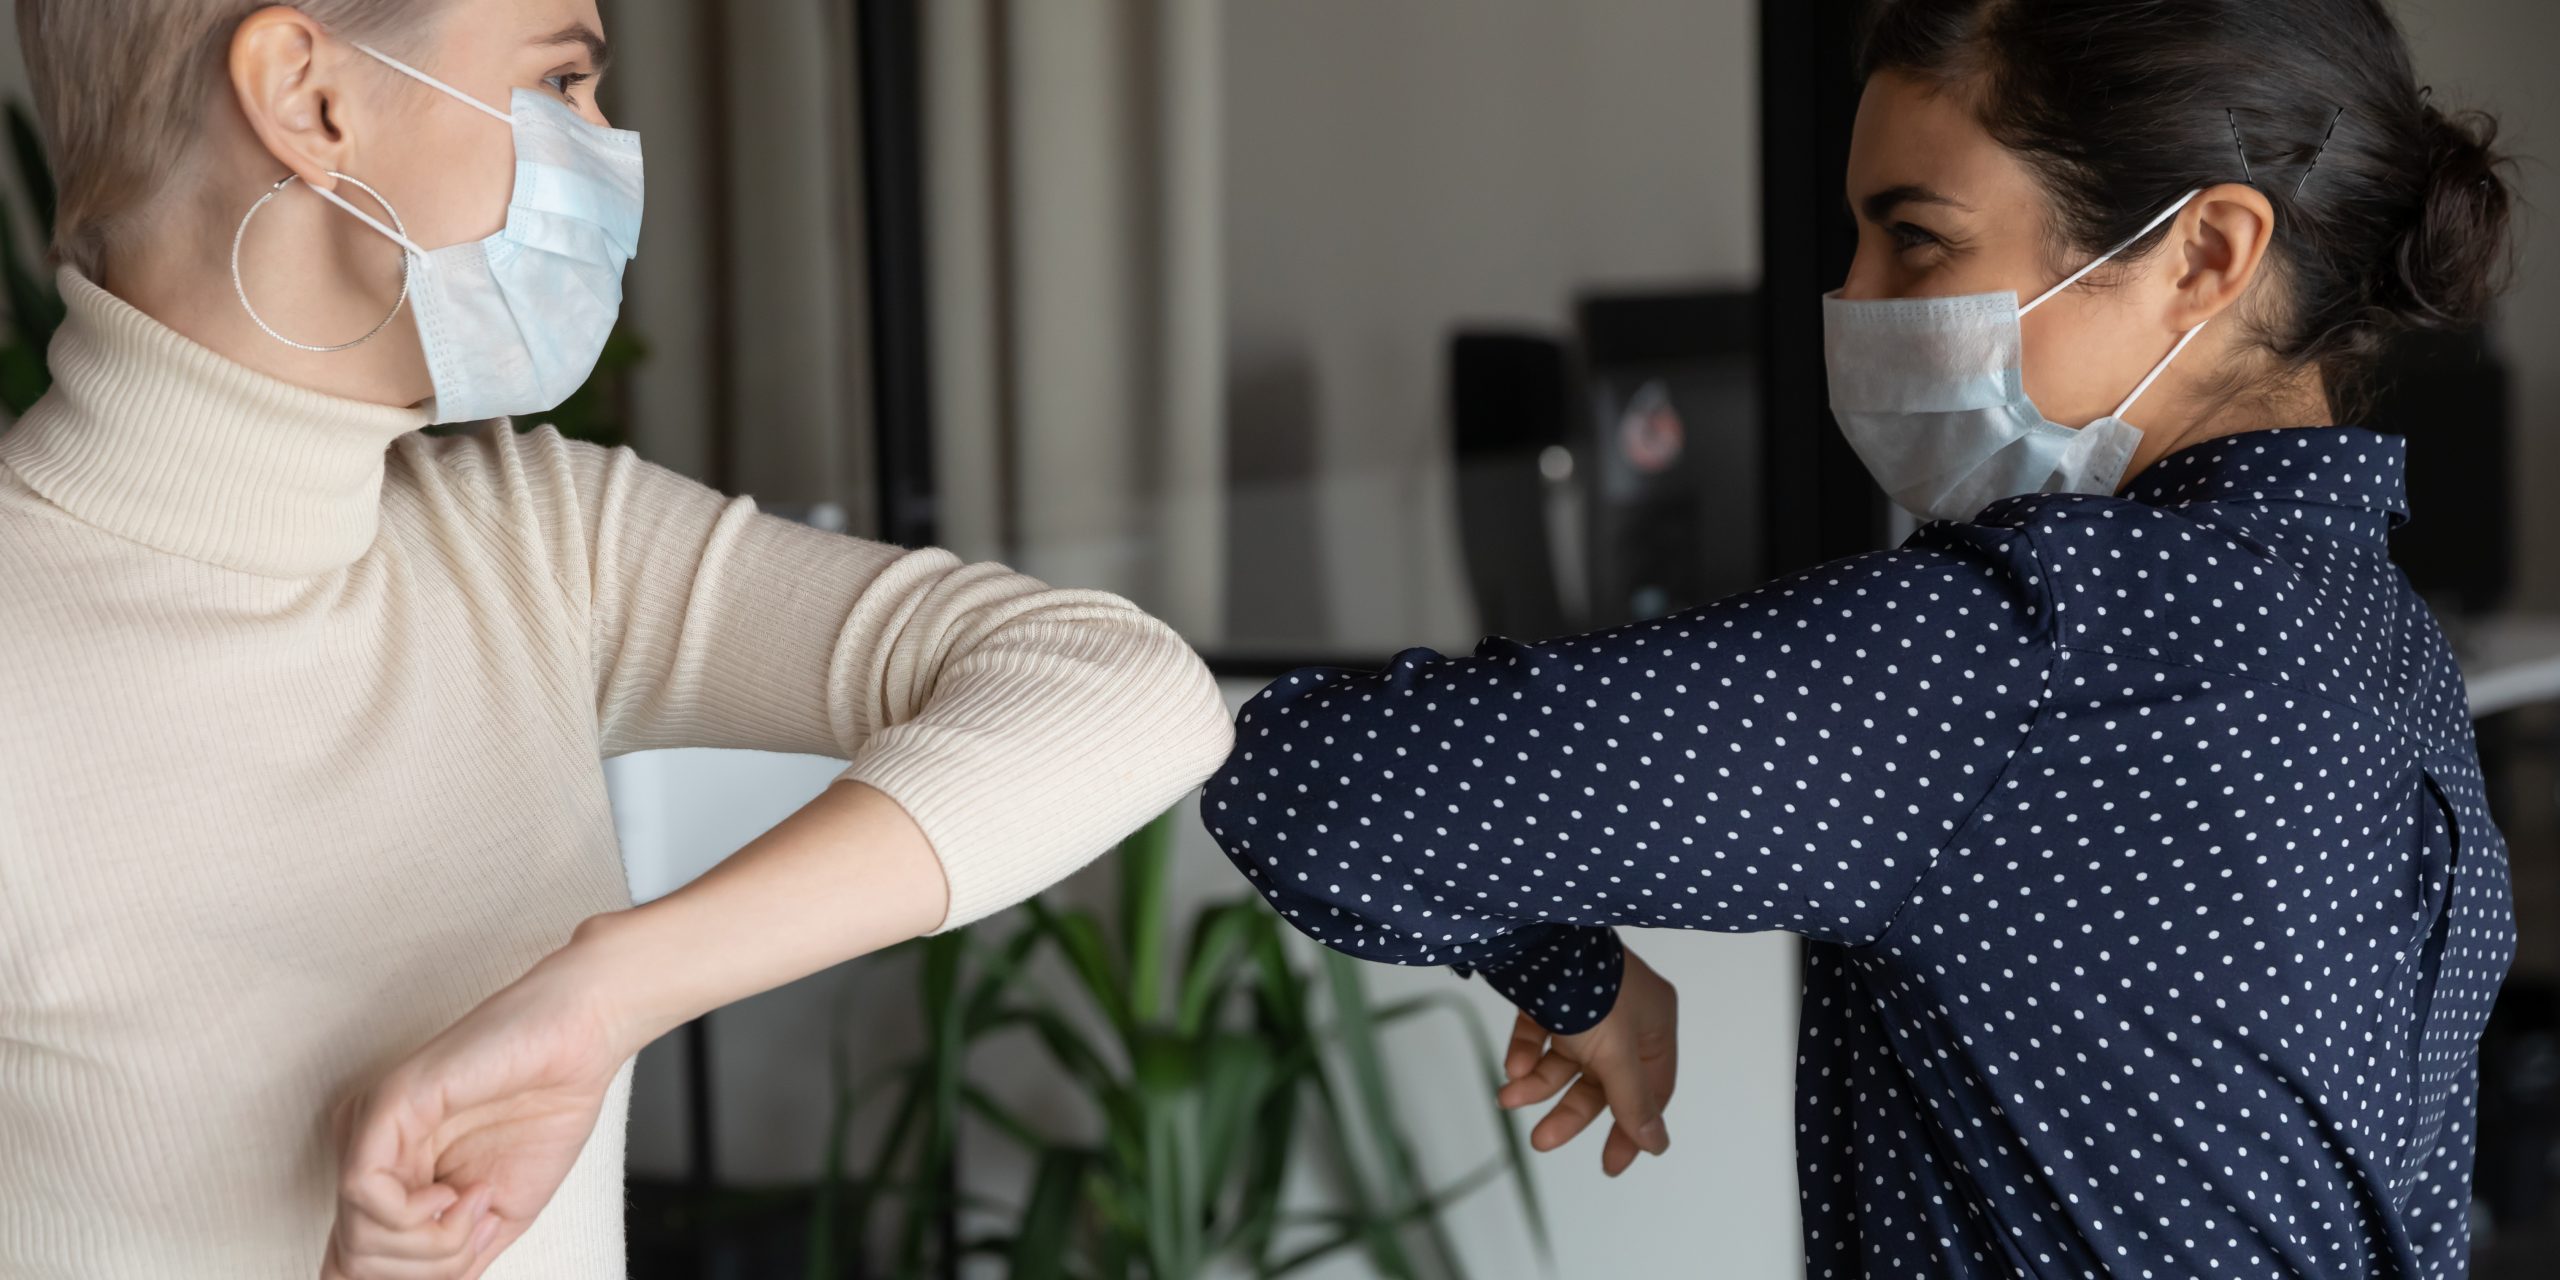 Smiling young healthy mixed race female colleagues wearing facial medical masks greeting each other by bumping elbows gesture at workplace keeping social distance, preventing spreading covid19 virus.